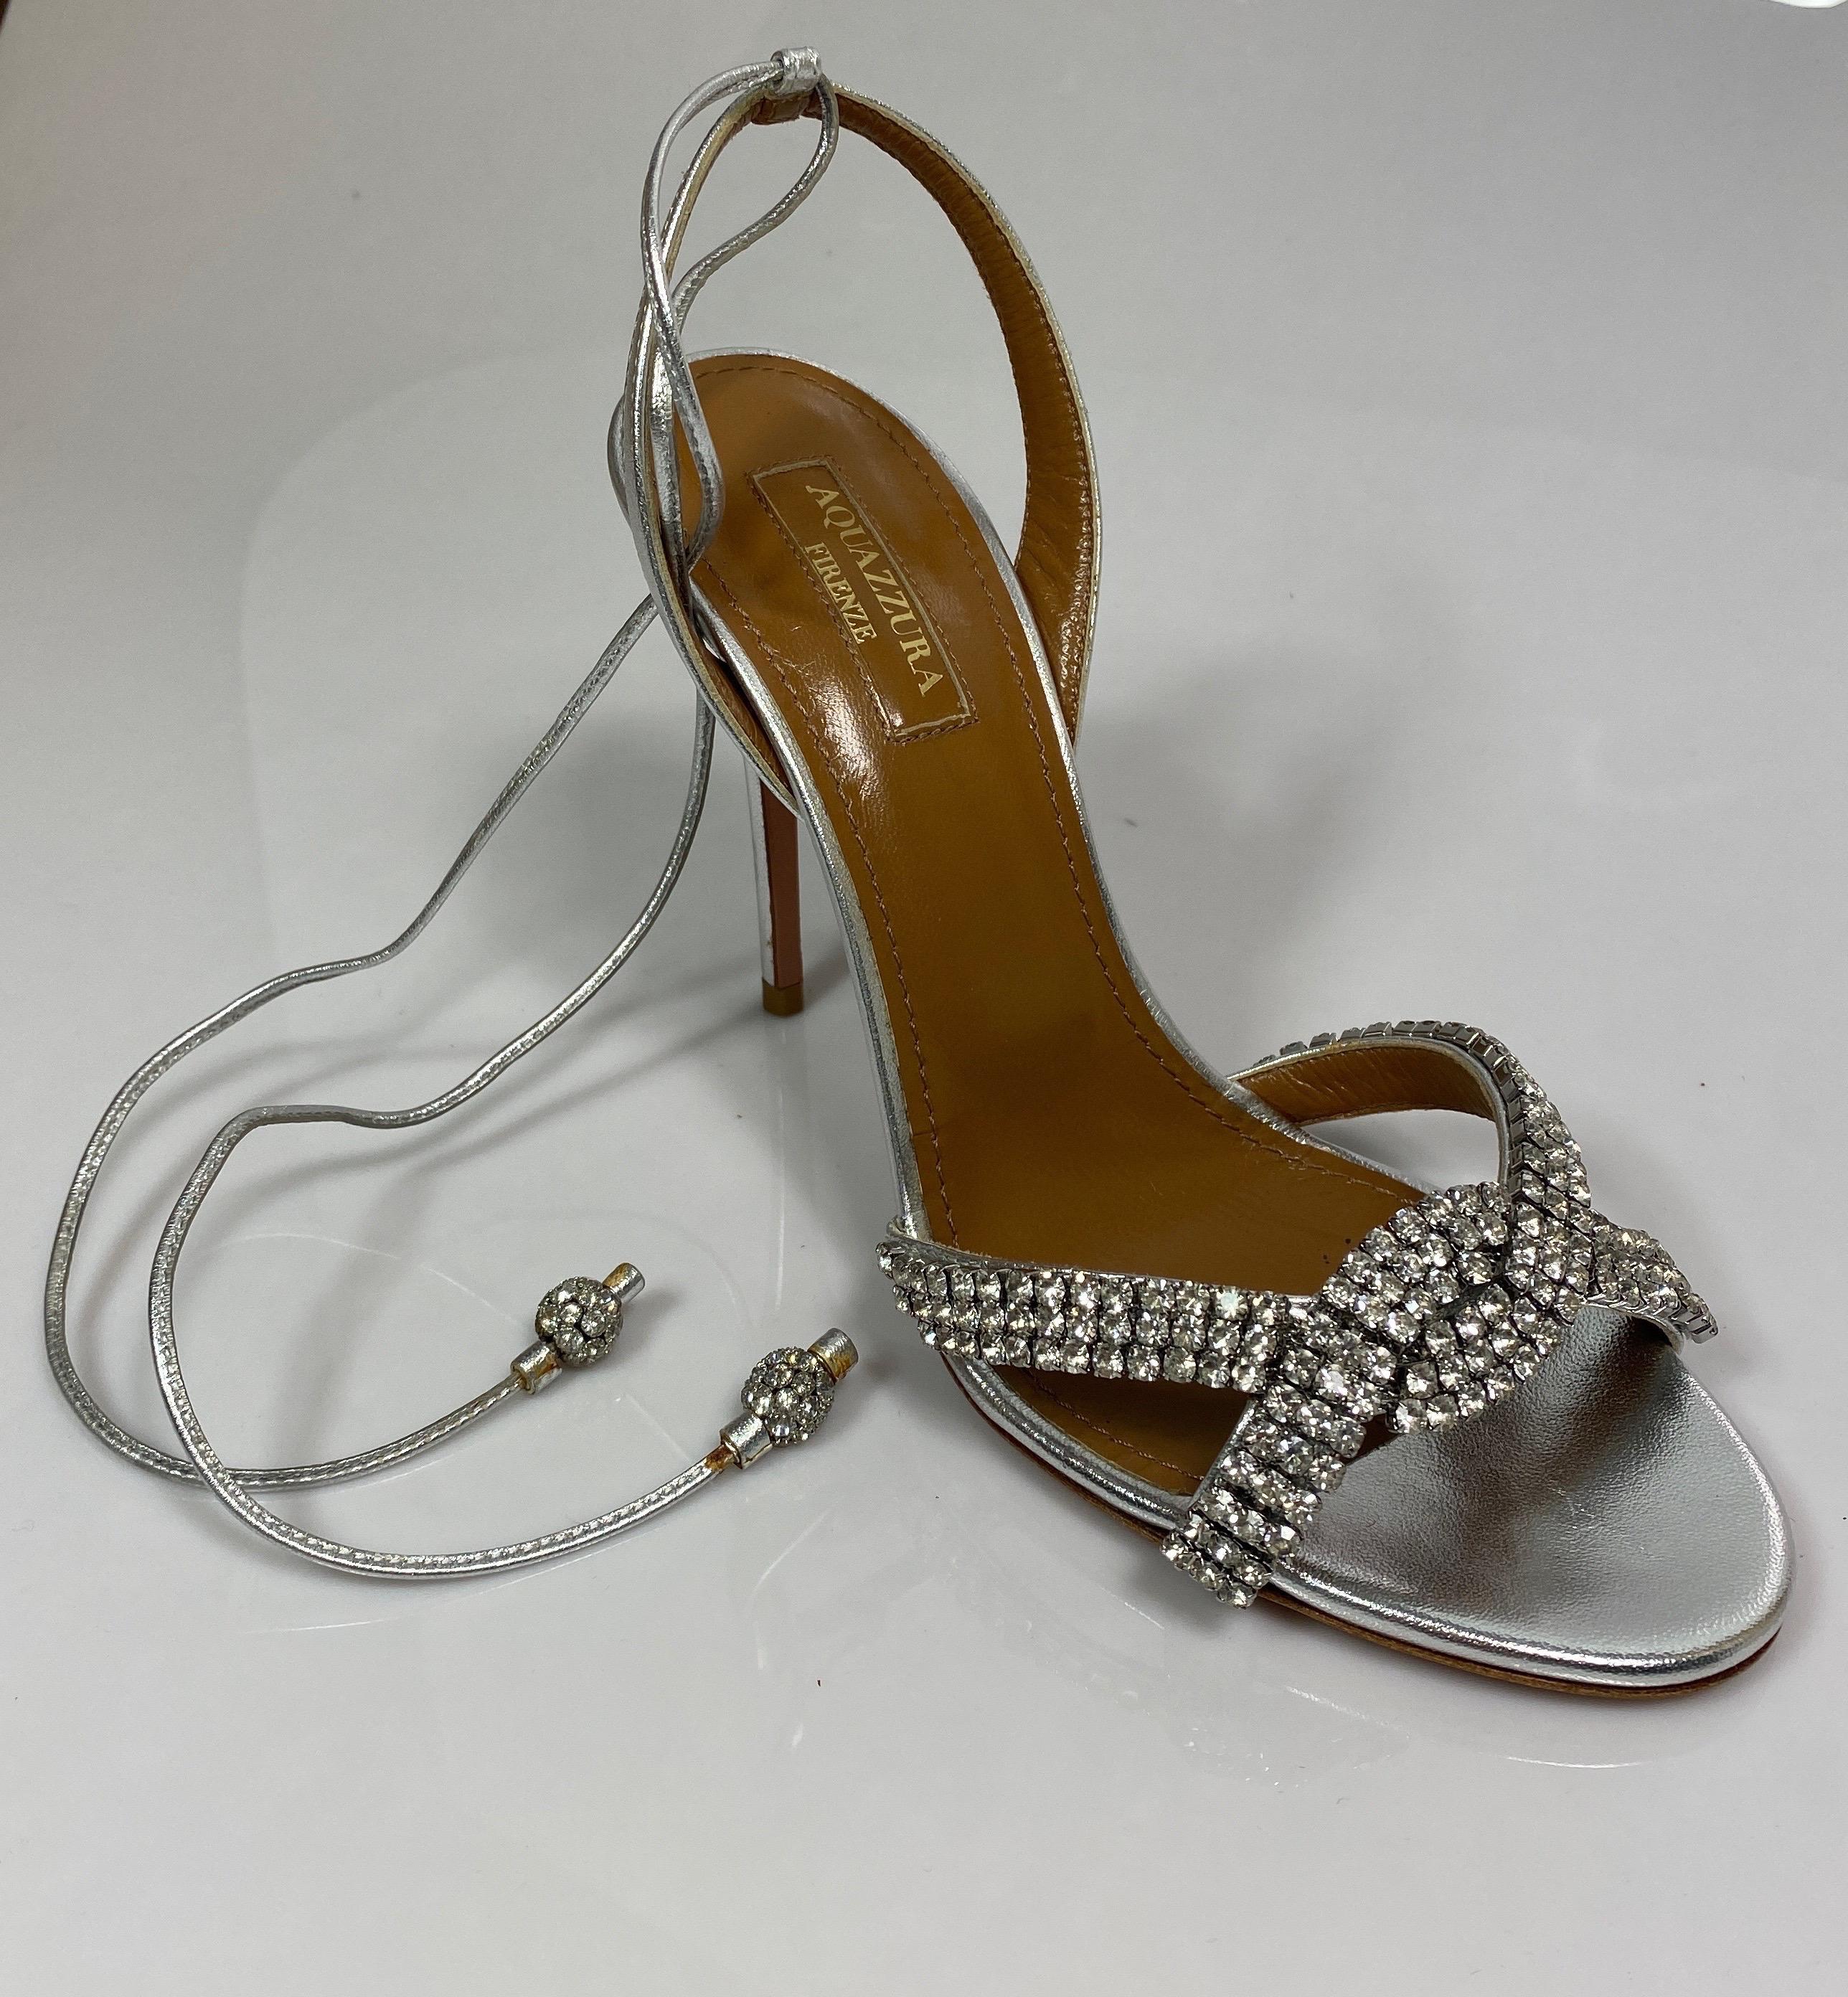 Aquazurra Silver “Dazzling Sandal” crystal embellished heels-Size 36 In Excellent Condition For Sale In West Palm Beach, FL